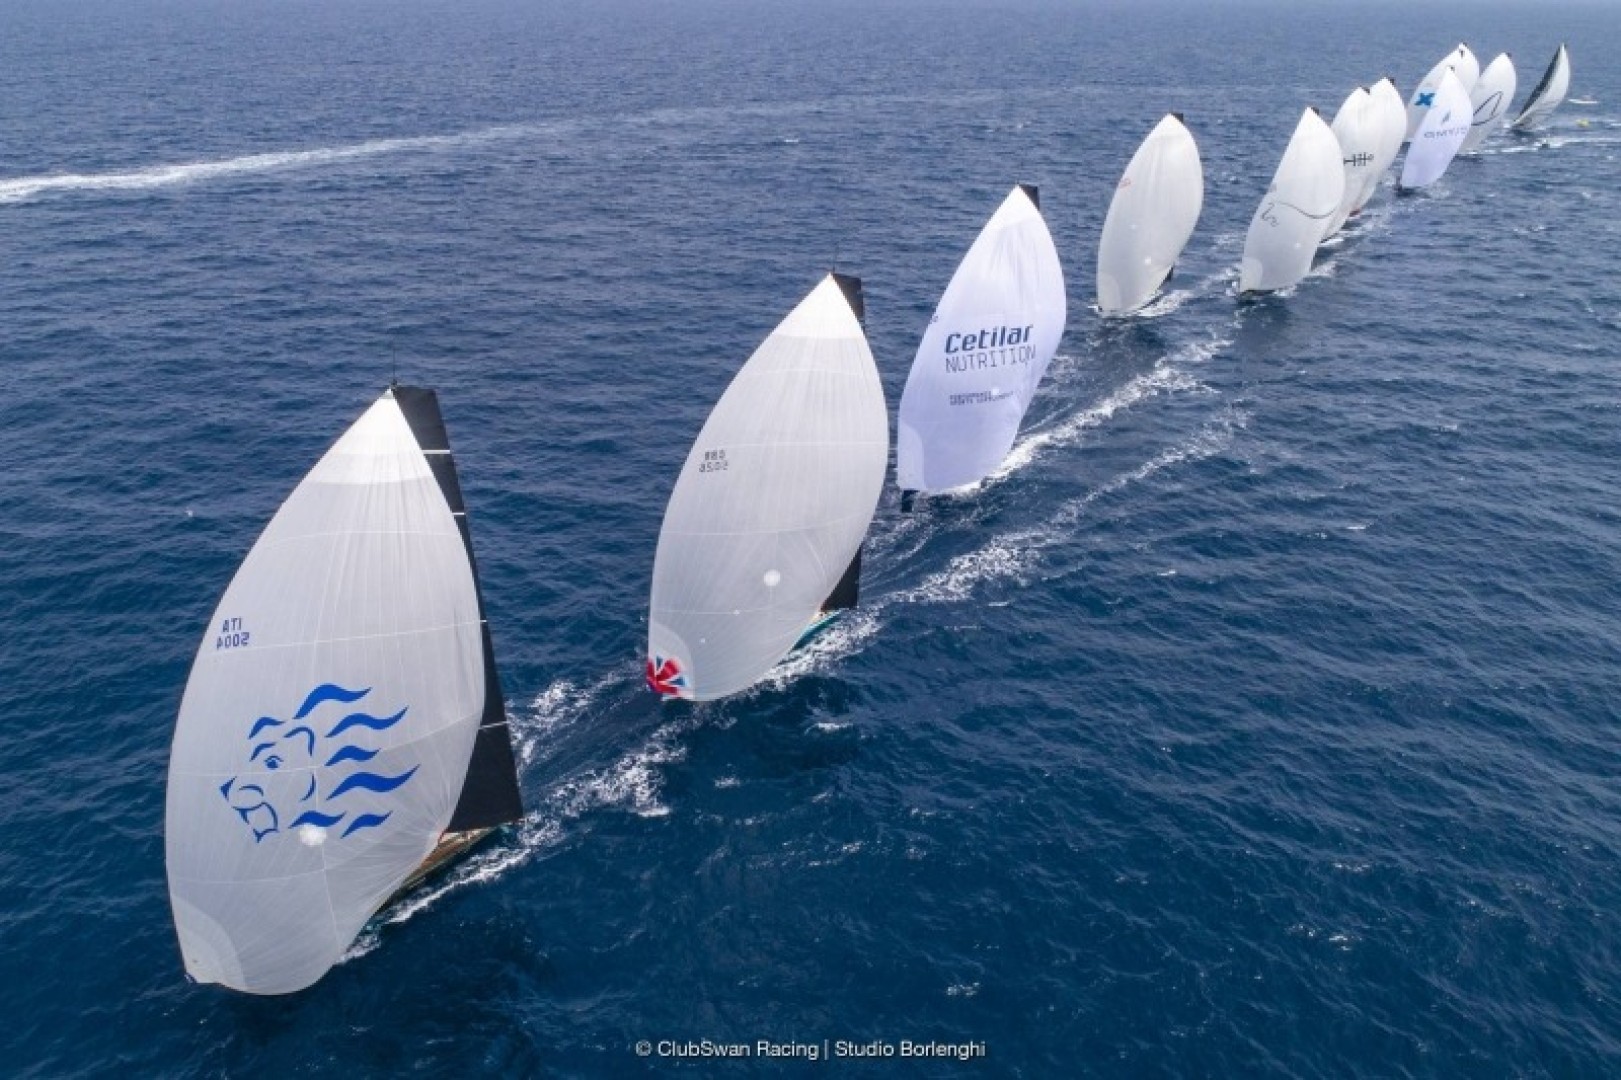 The ClubSwan 50s on a reach, The Nations Trophy - Swan One Design. Photo credits: ClubSwan/Studio Borlenghi